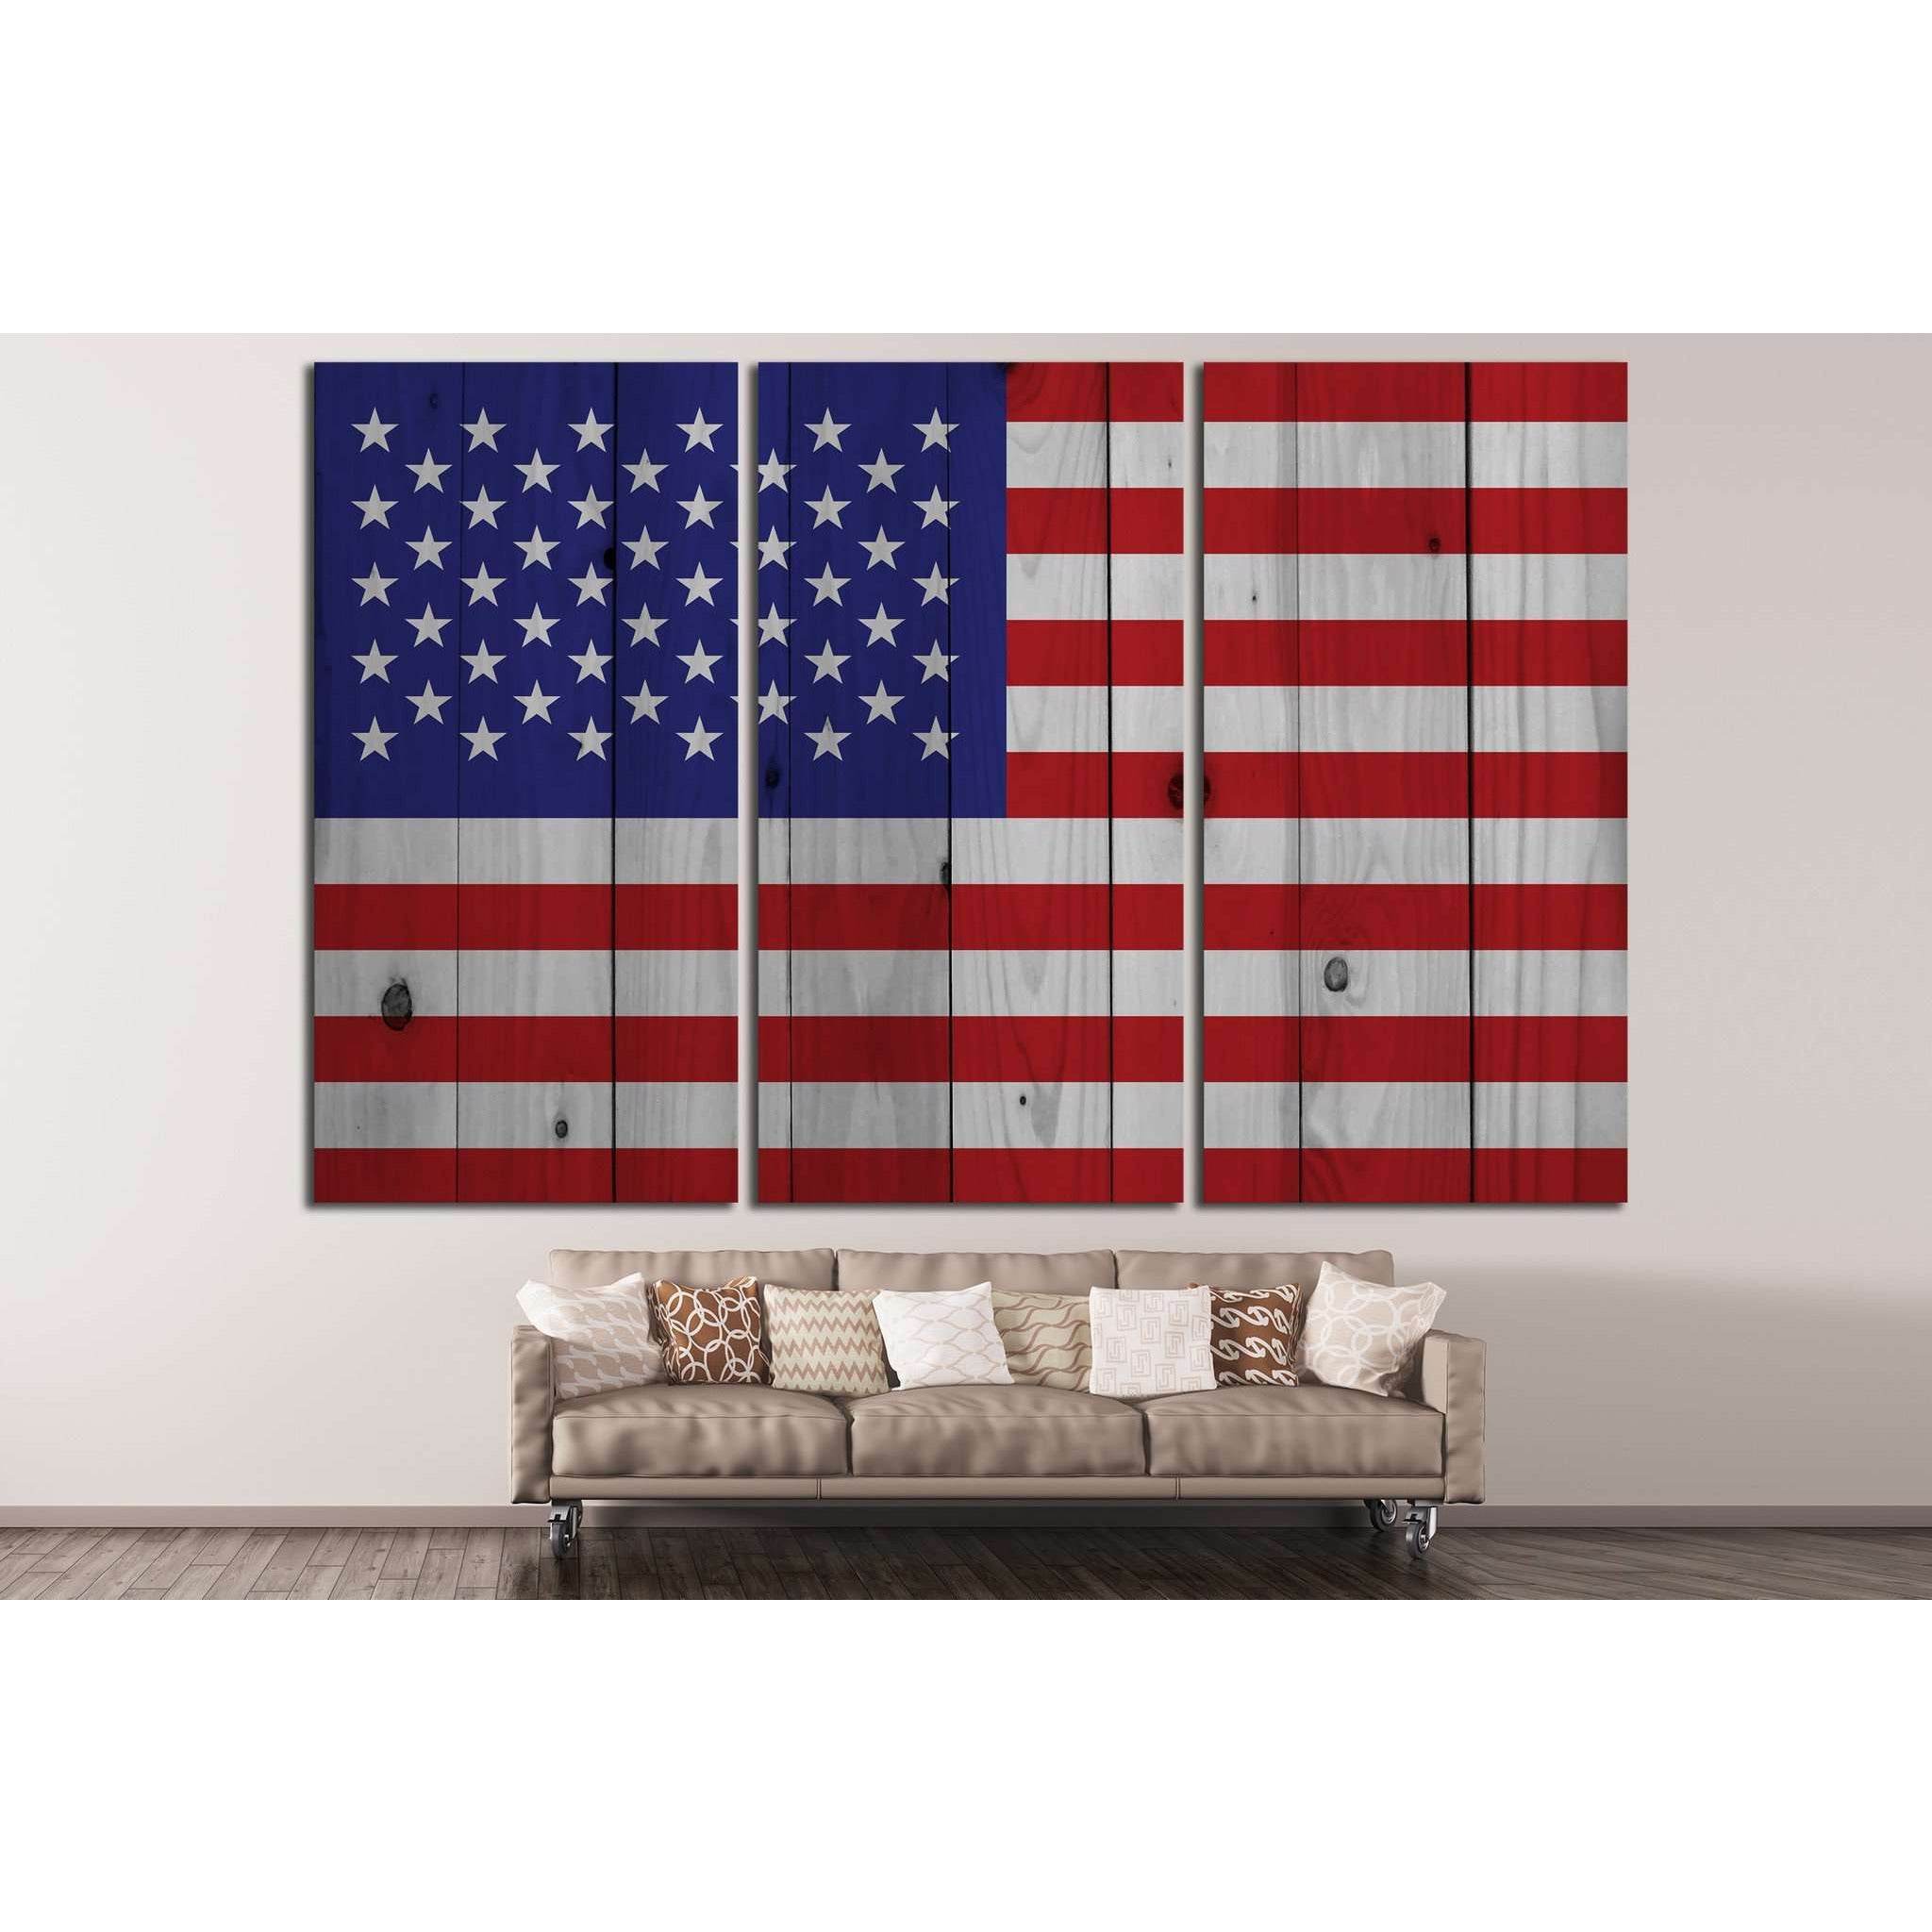 American flag №670 Ready to Hang Canvas Print